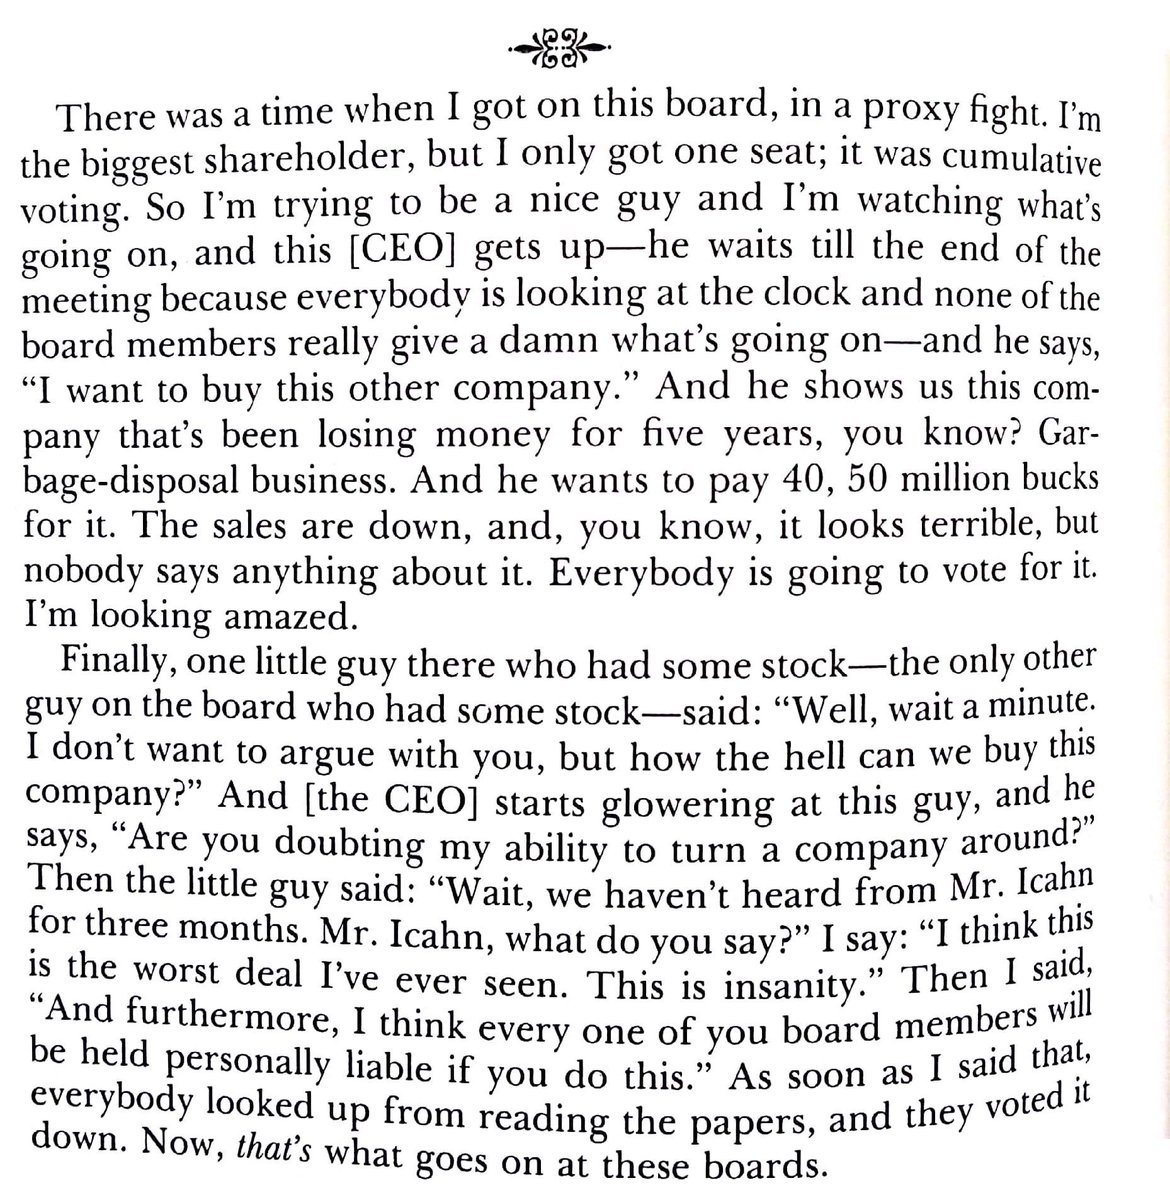 Carl Icahn on what's really going on at board meetings. This is truly ridiculous: